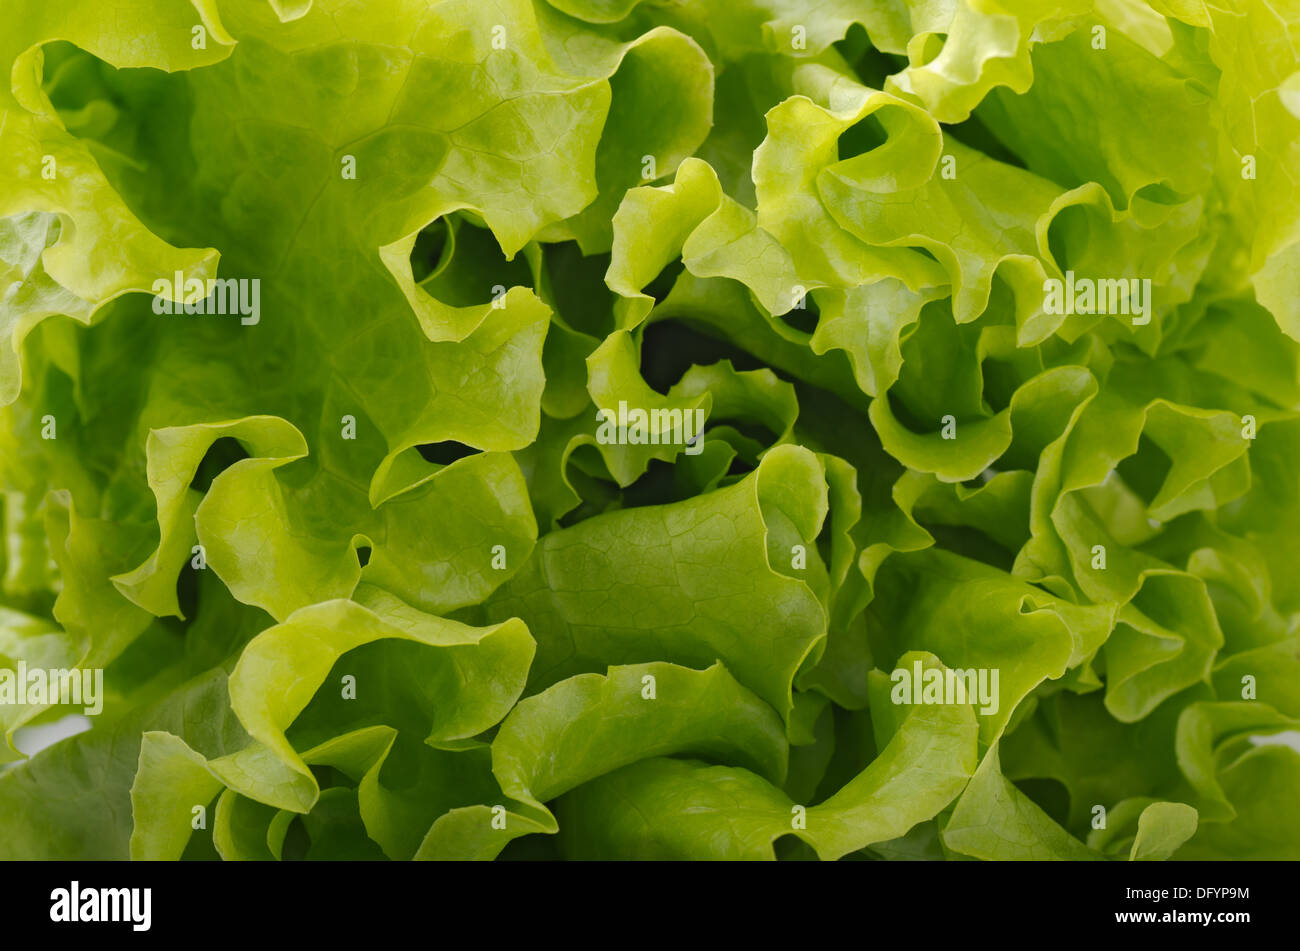 Close up of fresh lettuce leaves Stock Photo